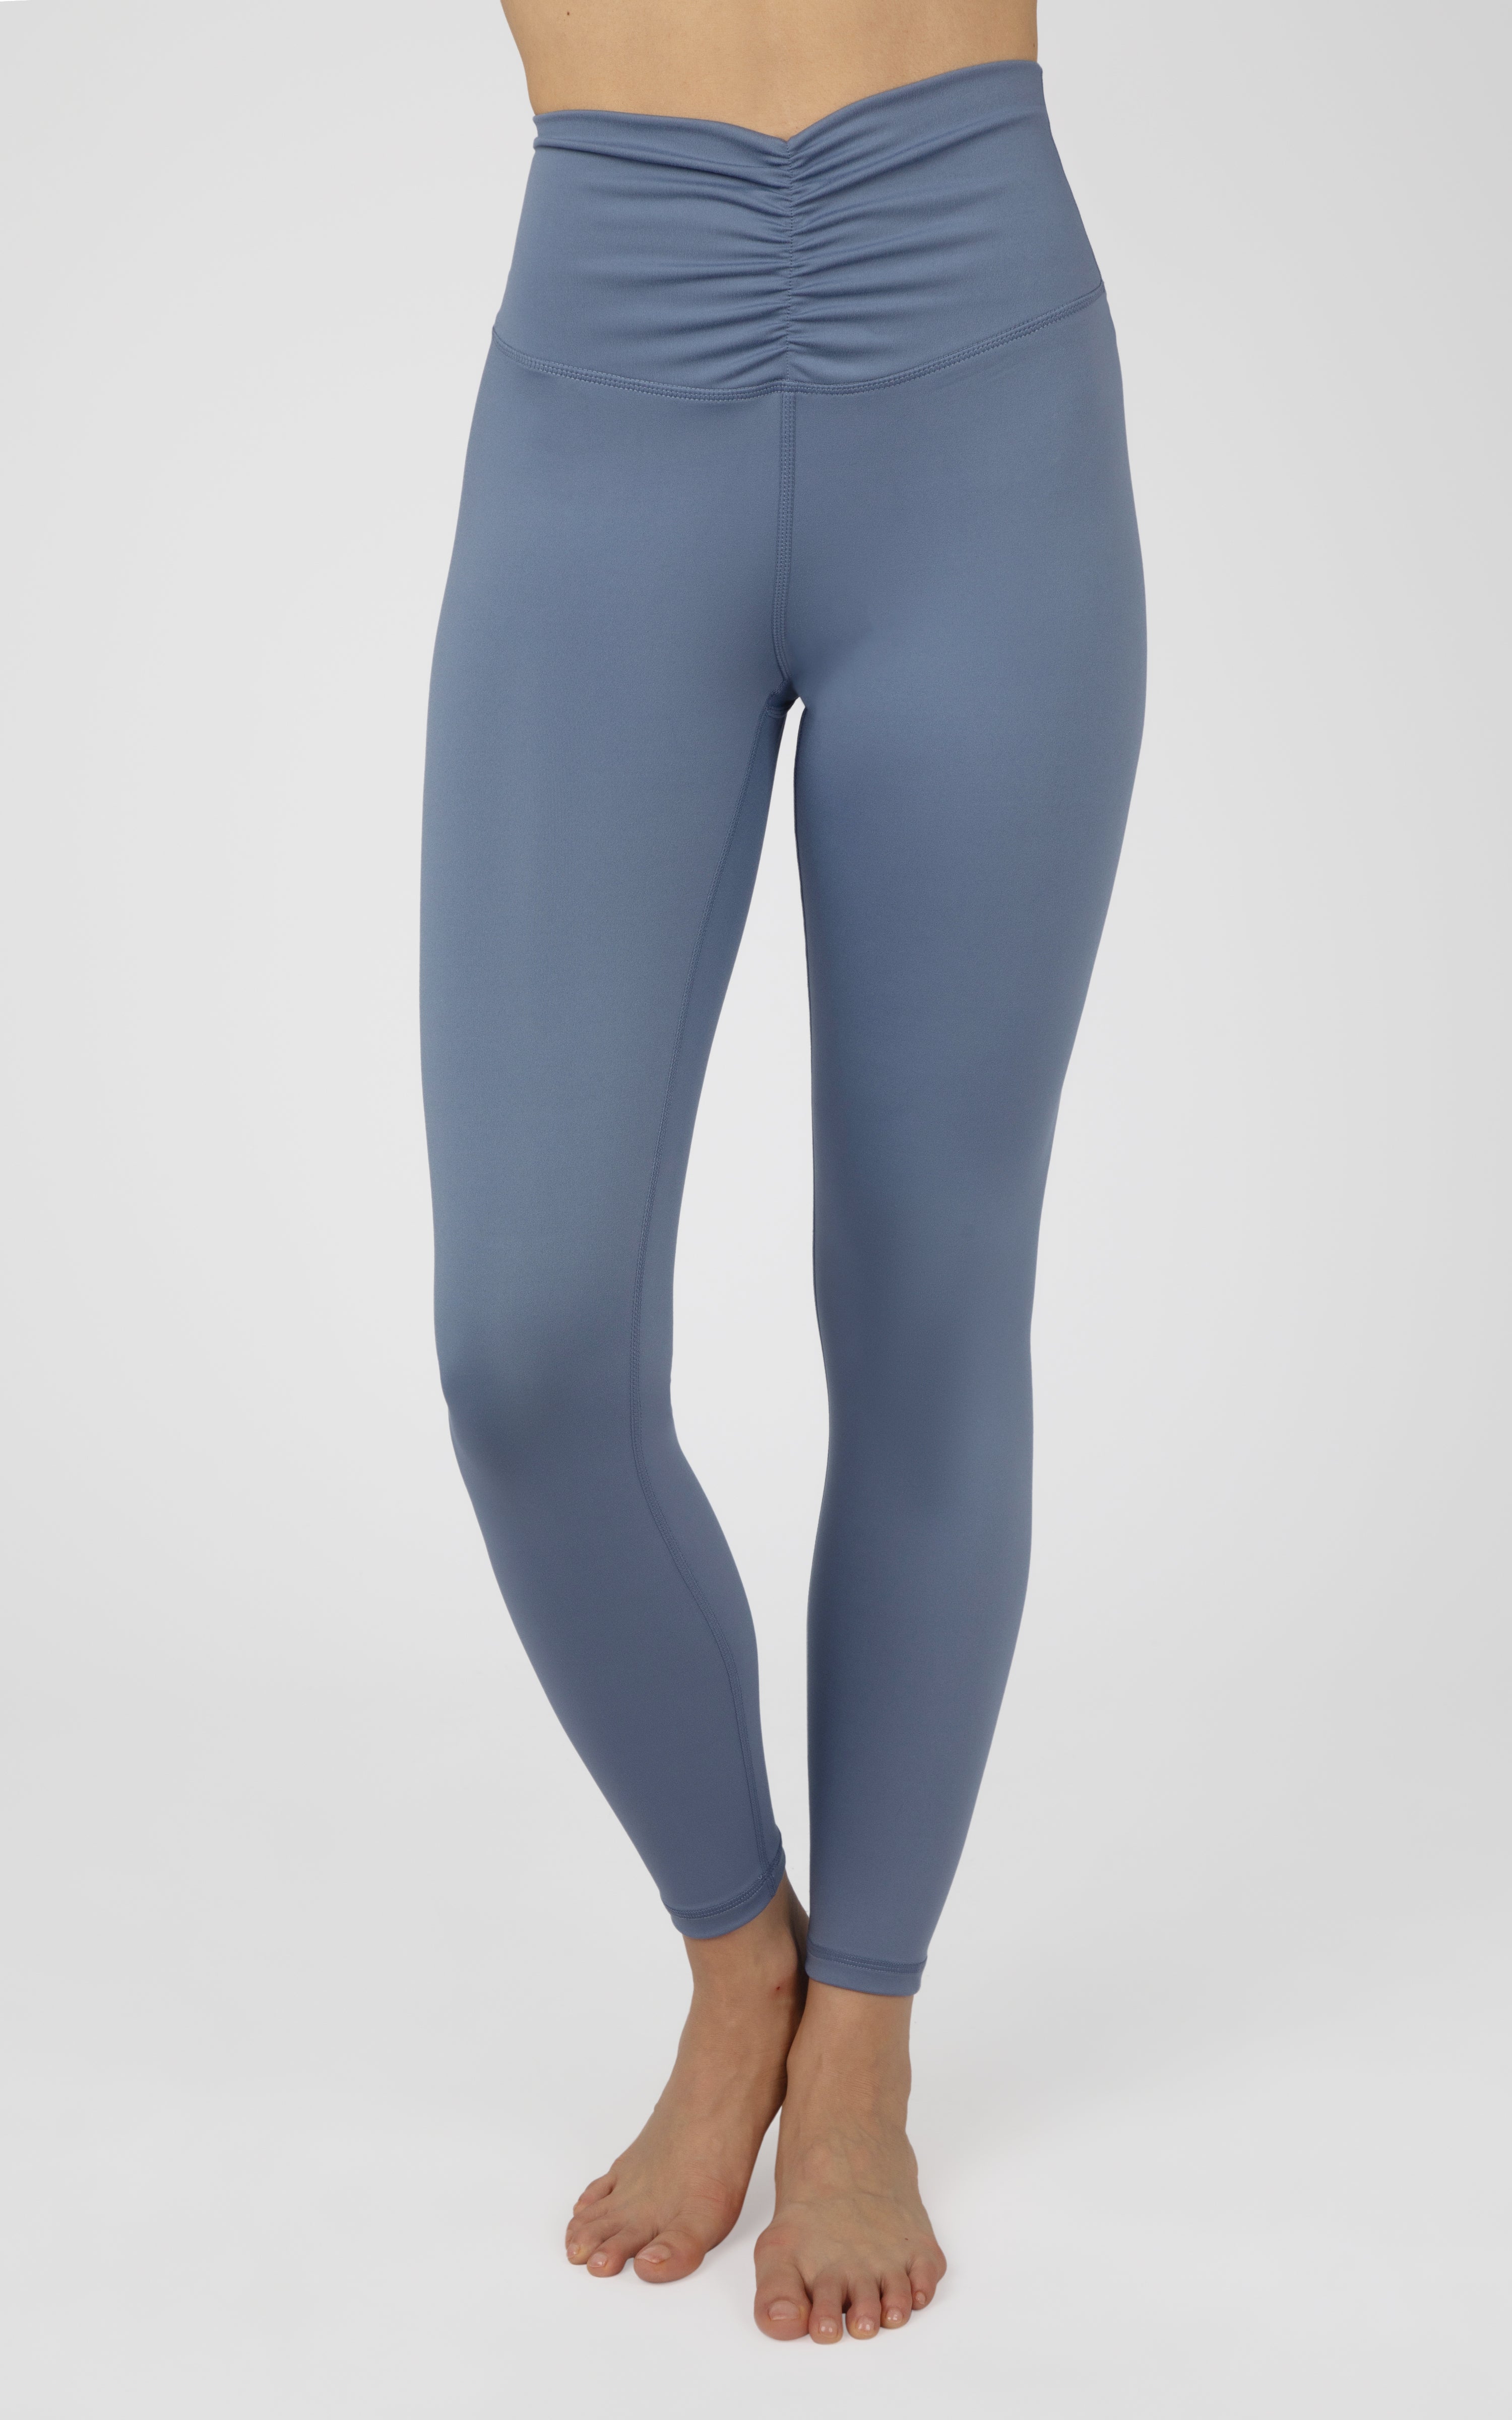 Buy Yogalicious High Waist Ultra Soft Ankle Length Leggings with